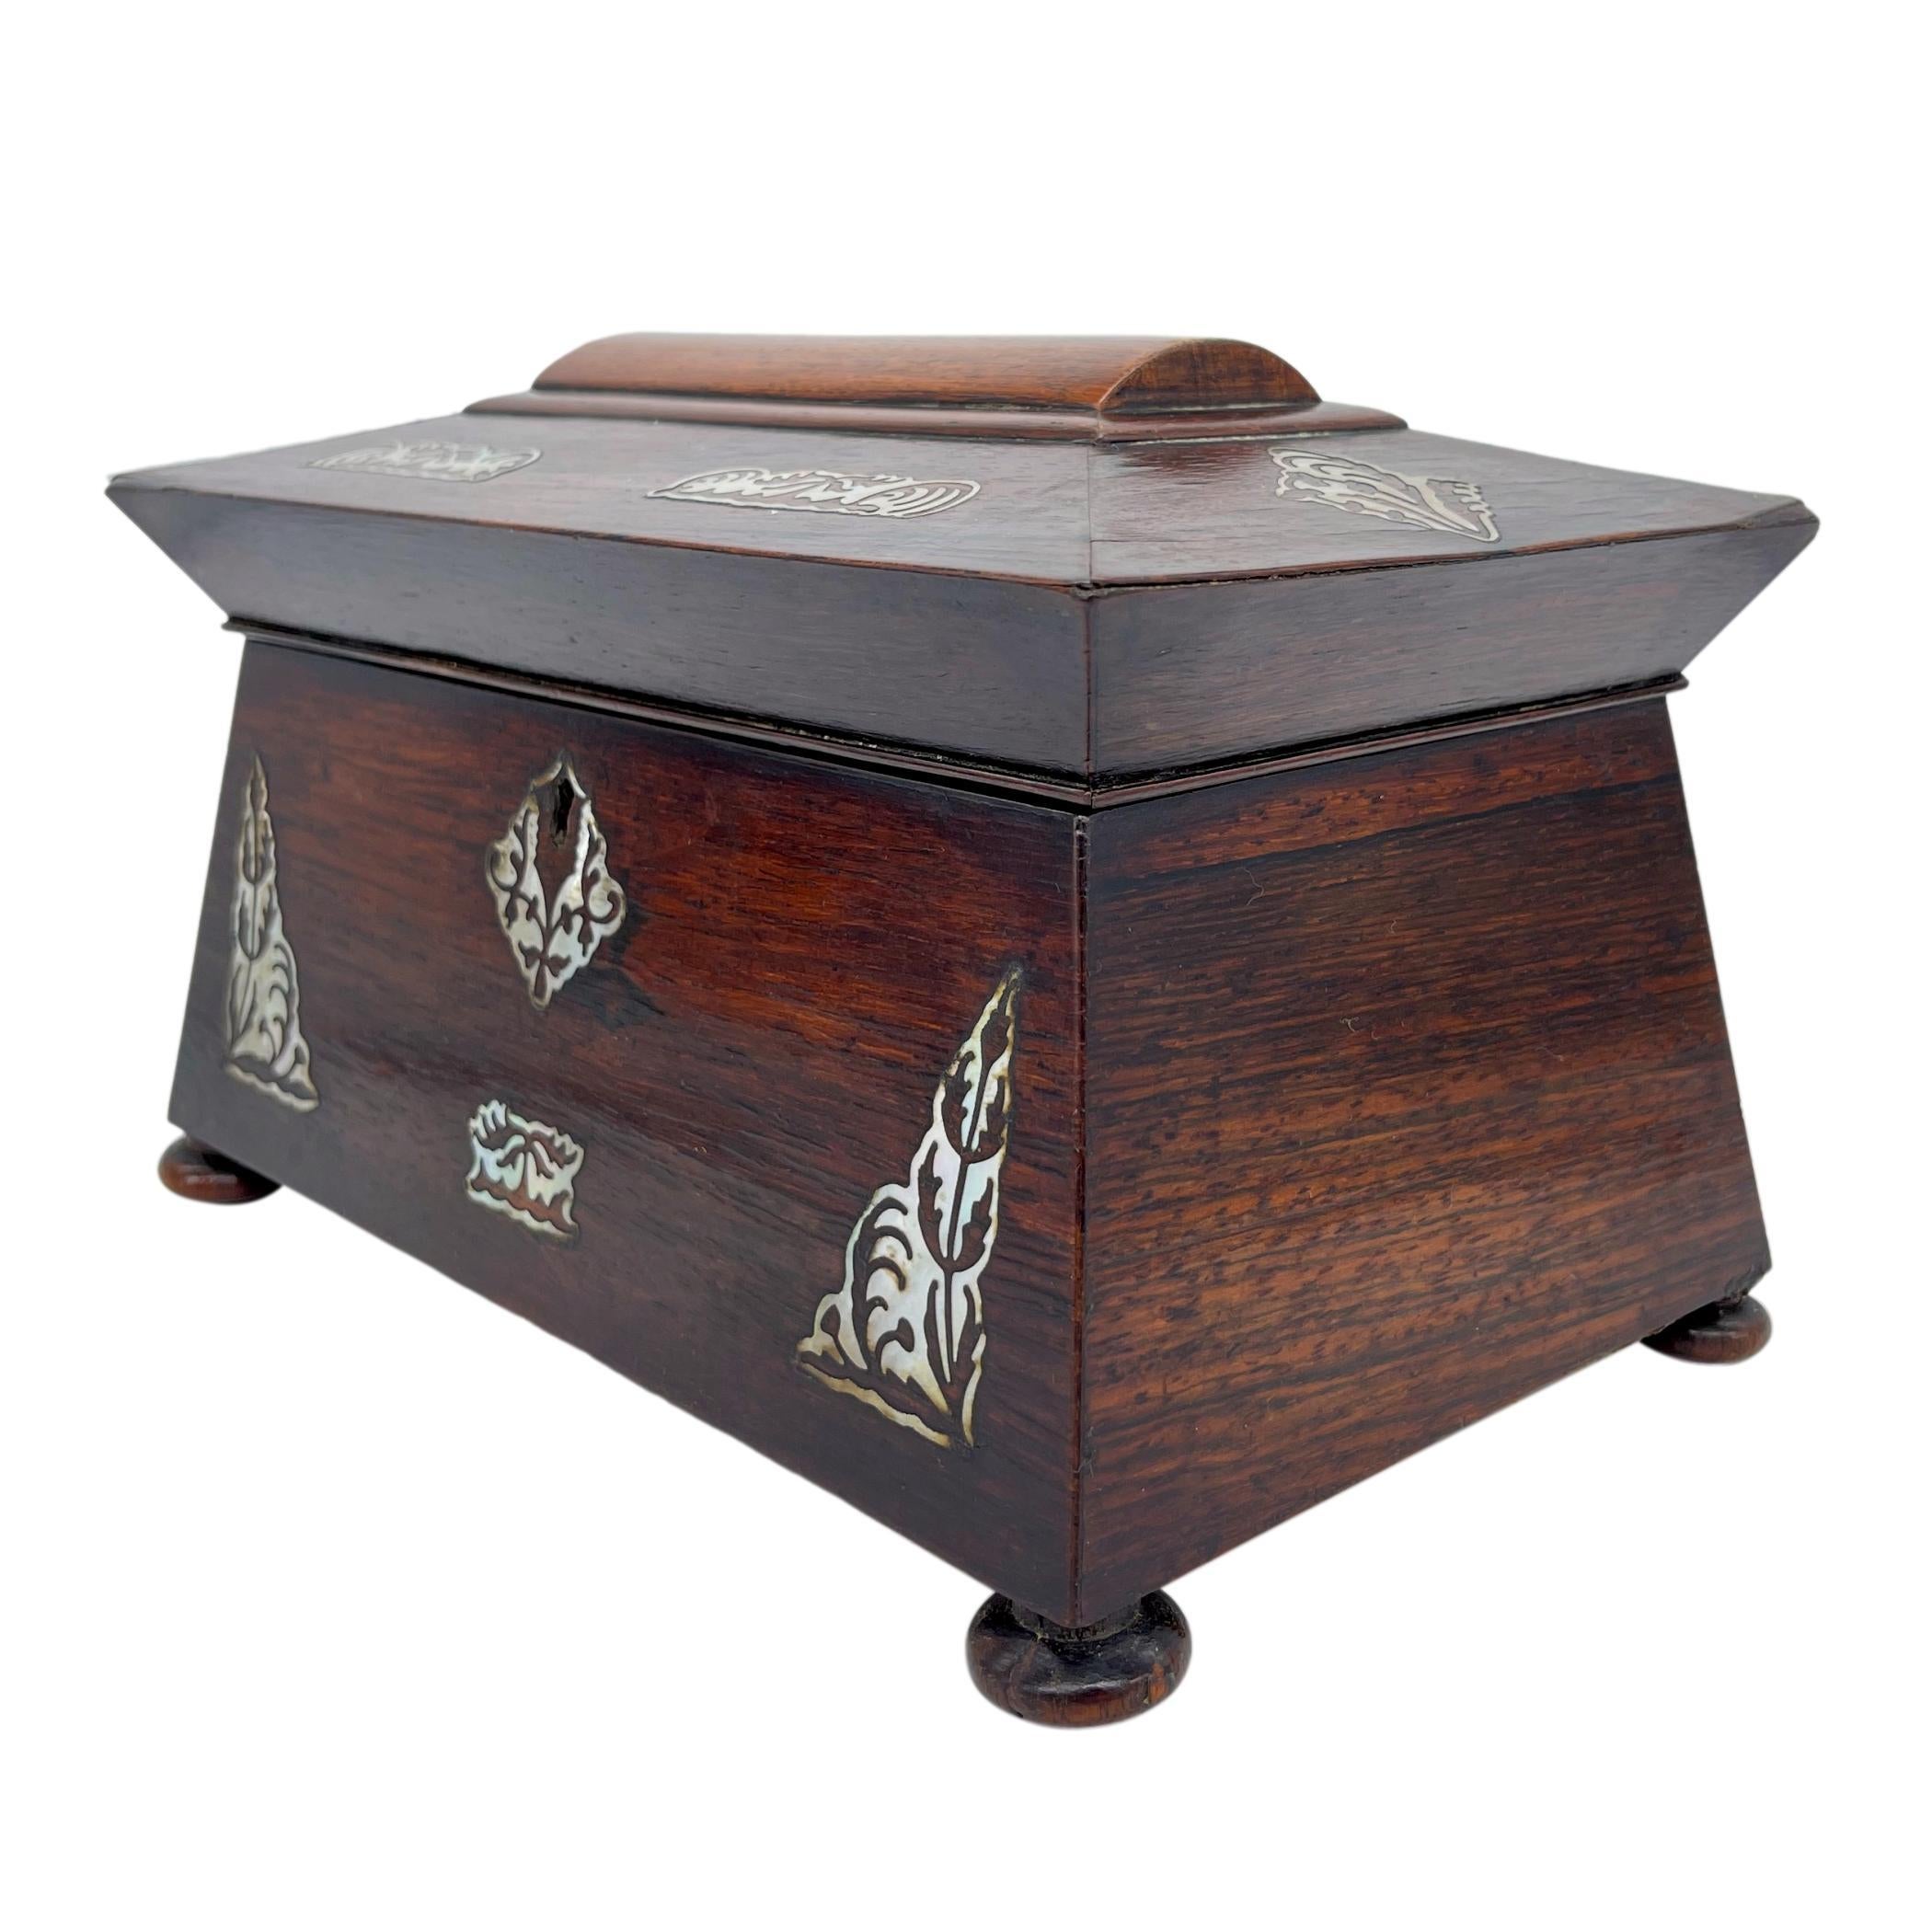 William IV rosewood tea caddy, of sarcophagus form with finely inlaid mother-of-pearl medallions with stylized acanthus leaves, the escutcheon plate with further similar decoration, the interior with both original chamfered solid rosewood